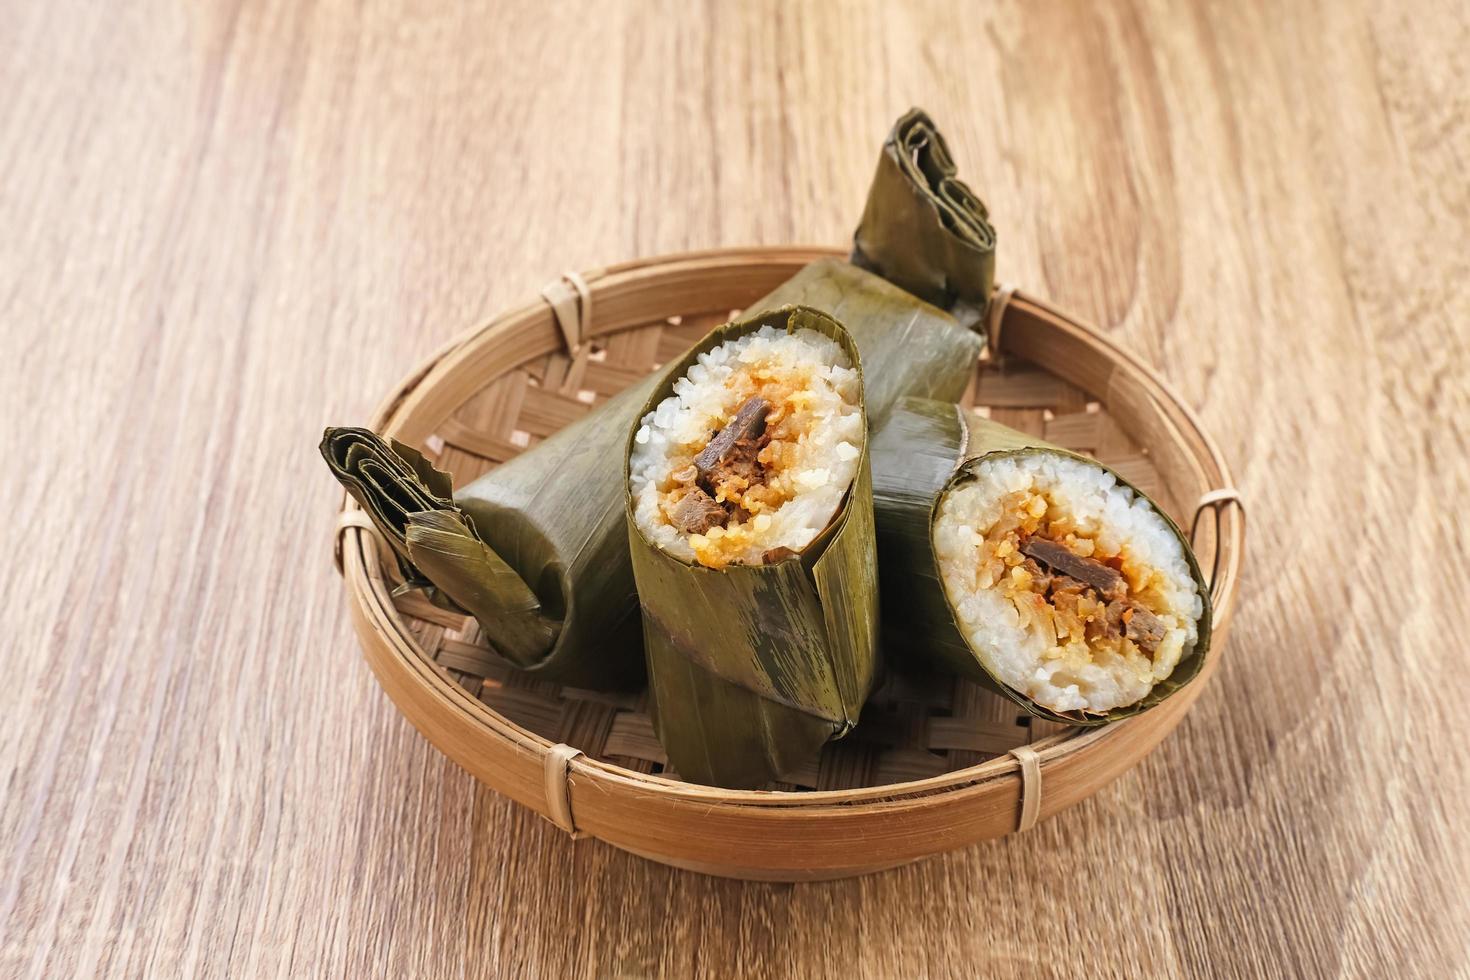 Arem-arem, a traditional Indonesian food made from rice filled with vegetables, chicken, meat or tempeh wrapped in banana leaves. Arem-arem is popular as a breakfast substitute. Selected focus. photo